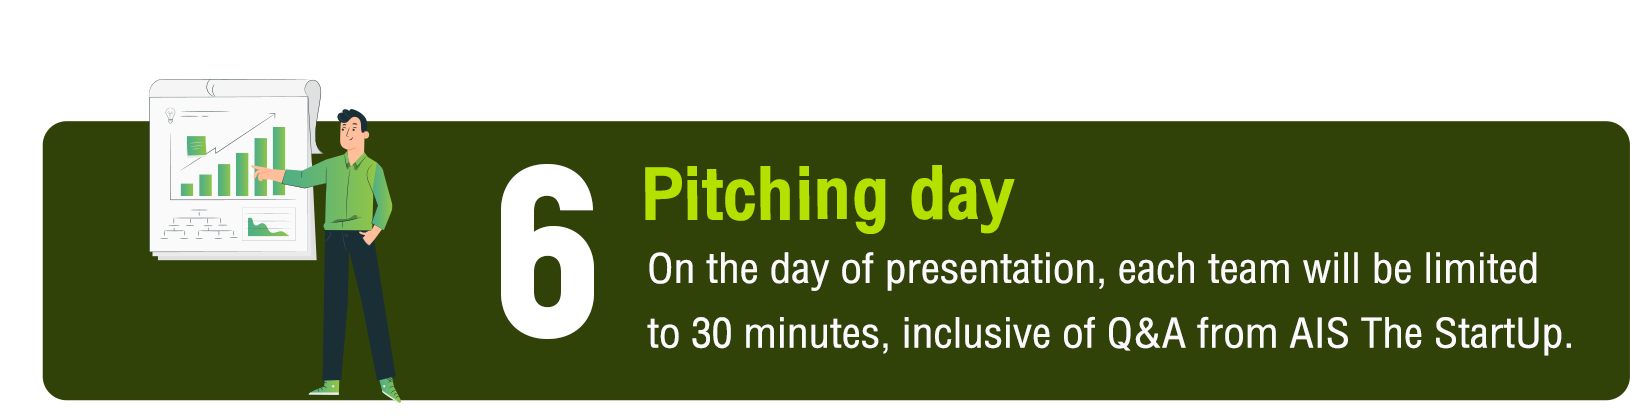 Pitching day